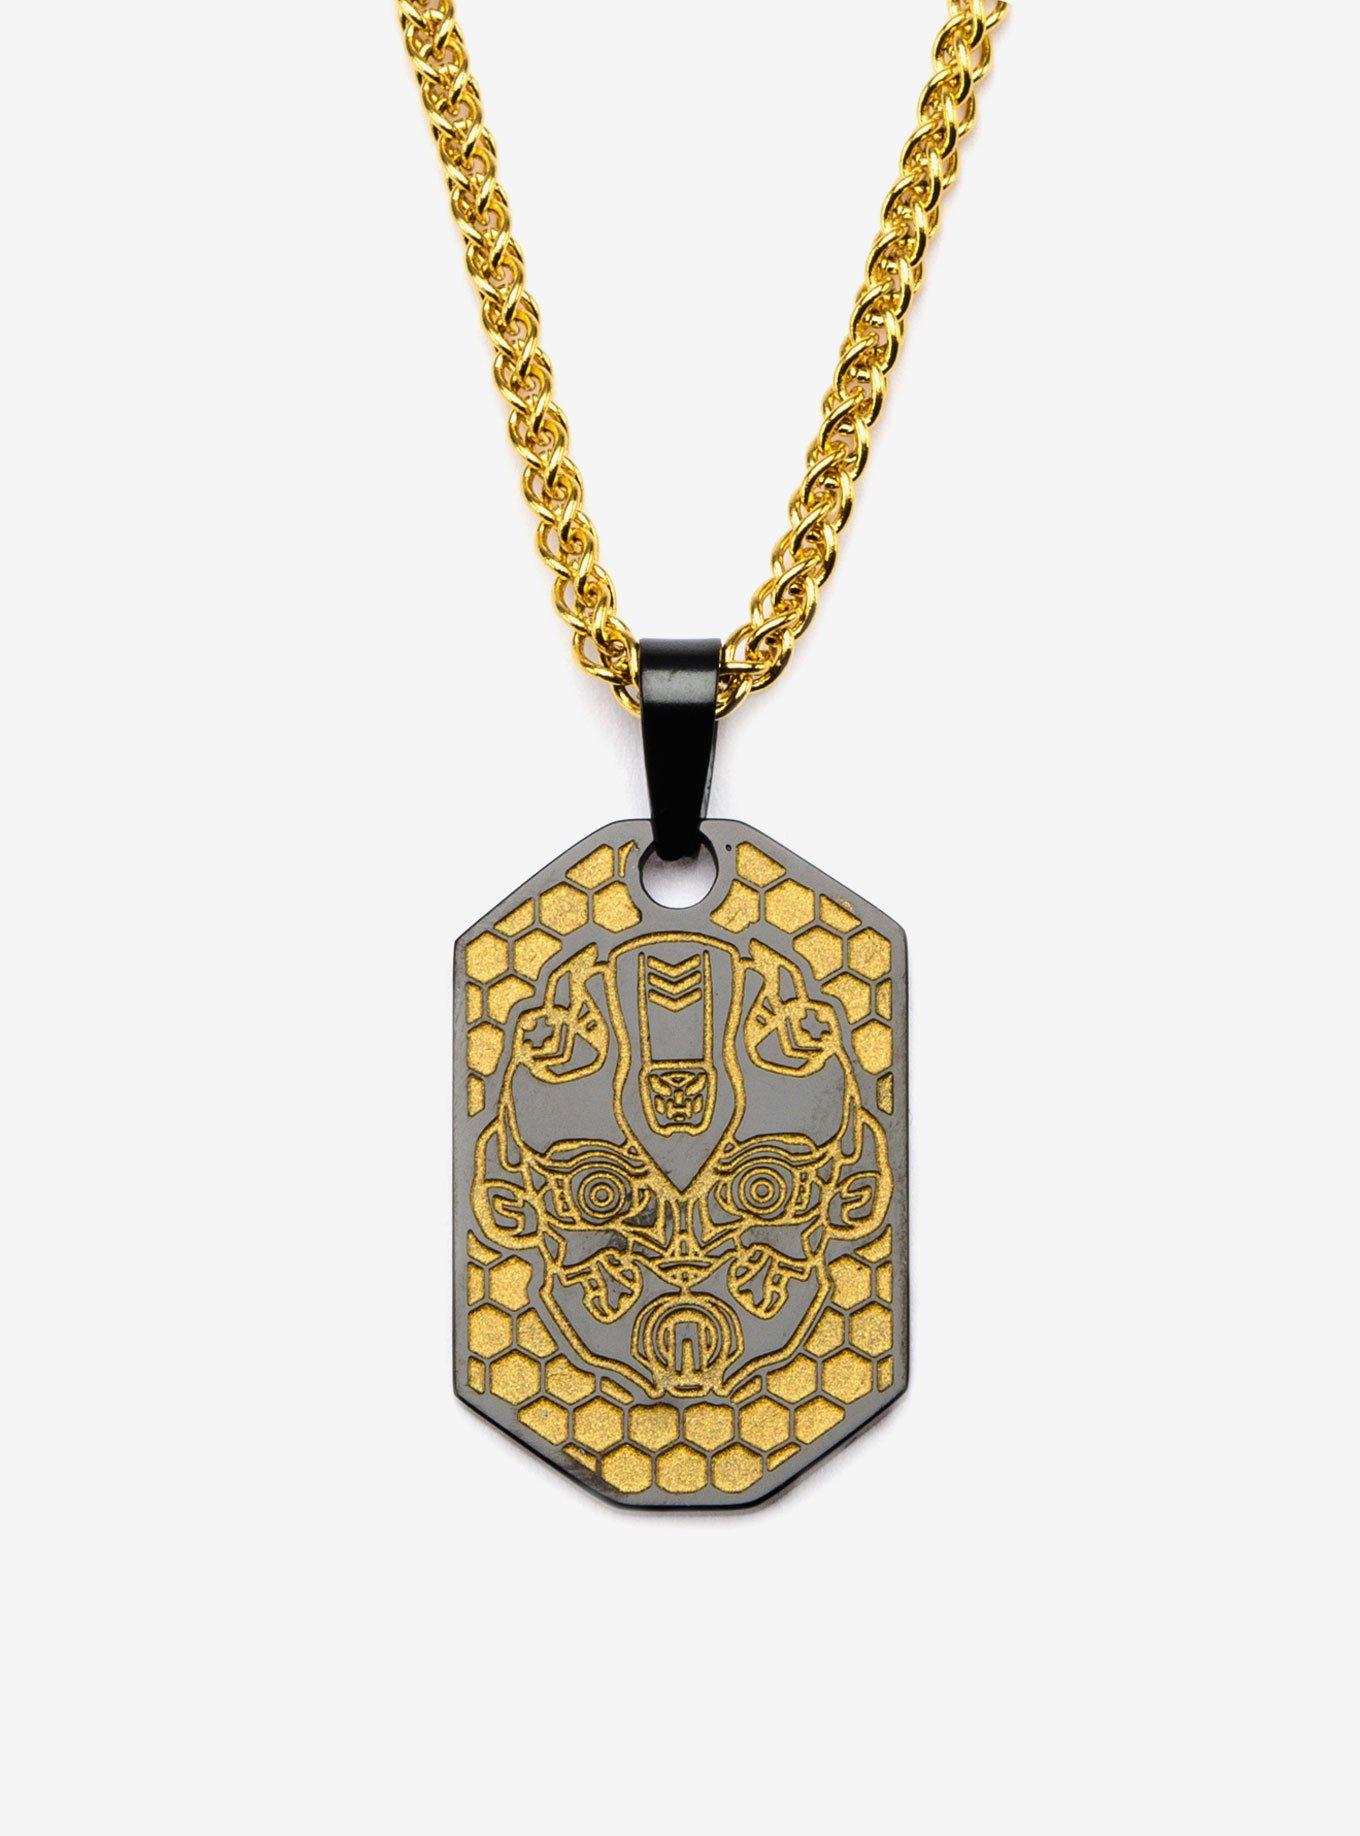 Transformers Bumblebee Pendant With Chain